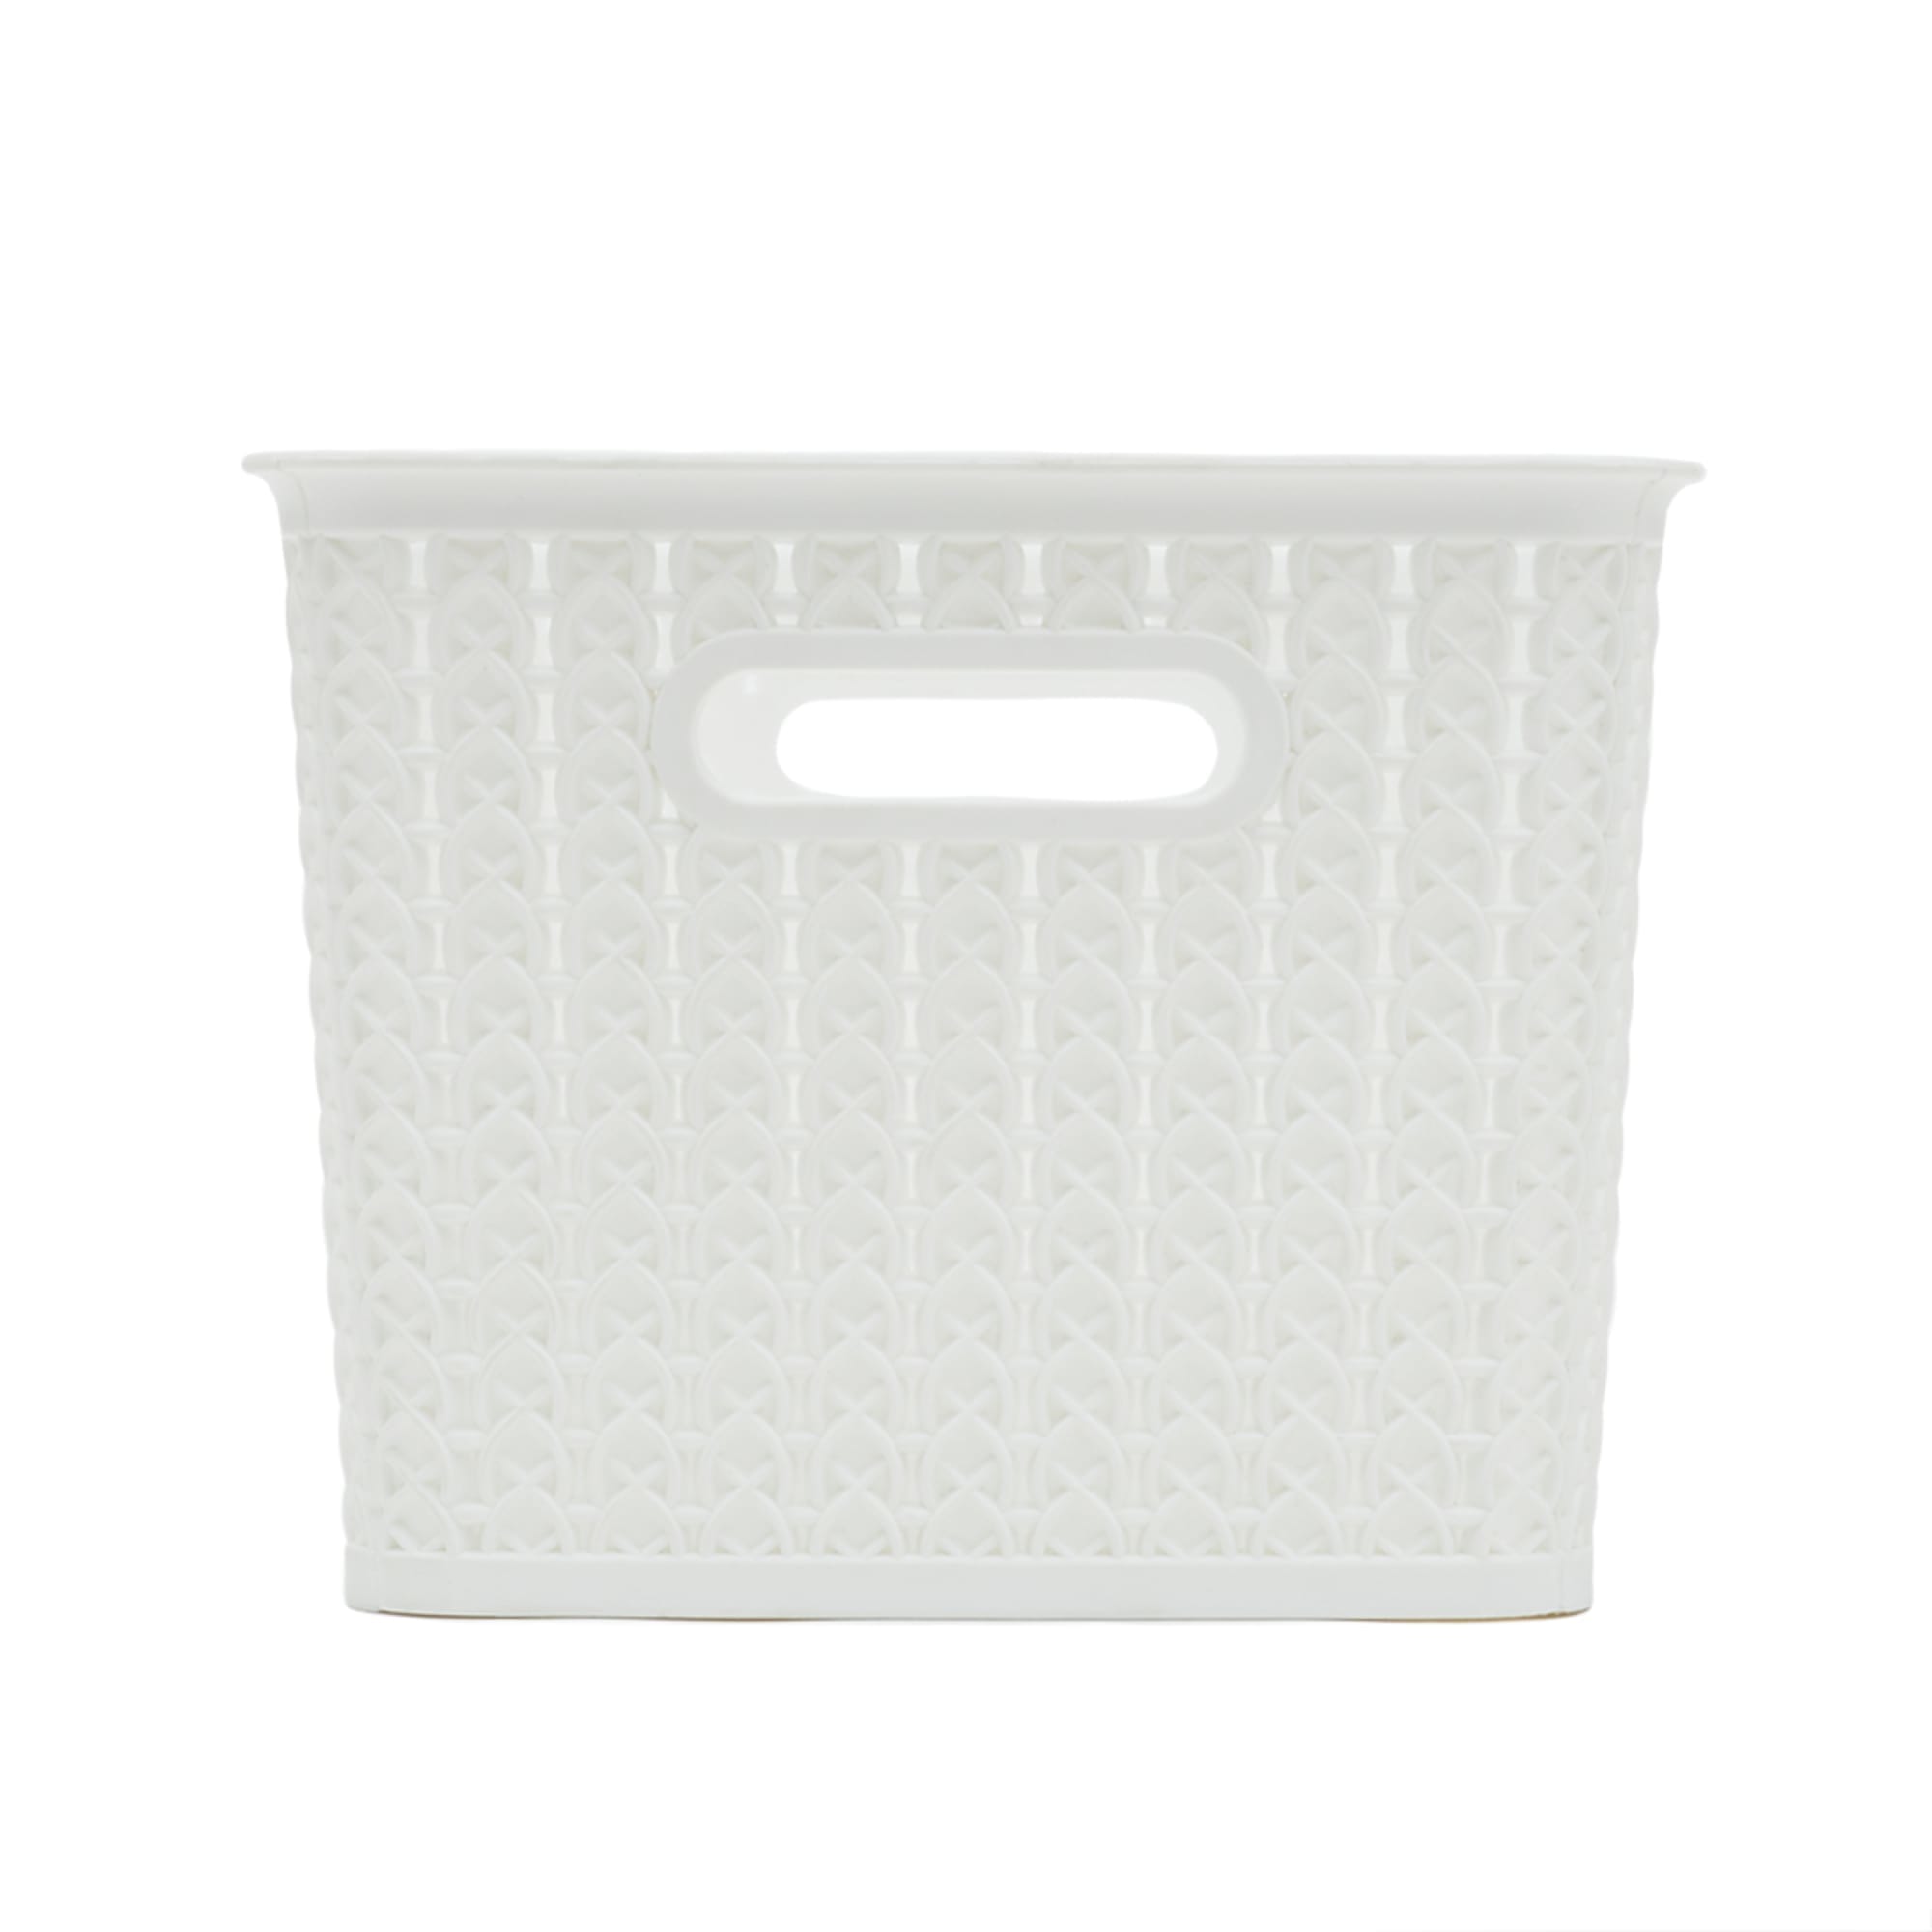 Home Basics 5 Liter Plastic Basket With Handles, White $4 EACH, CASE PACK OF 6